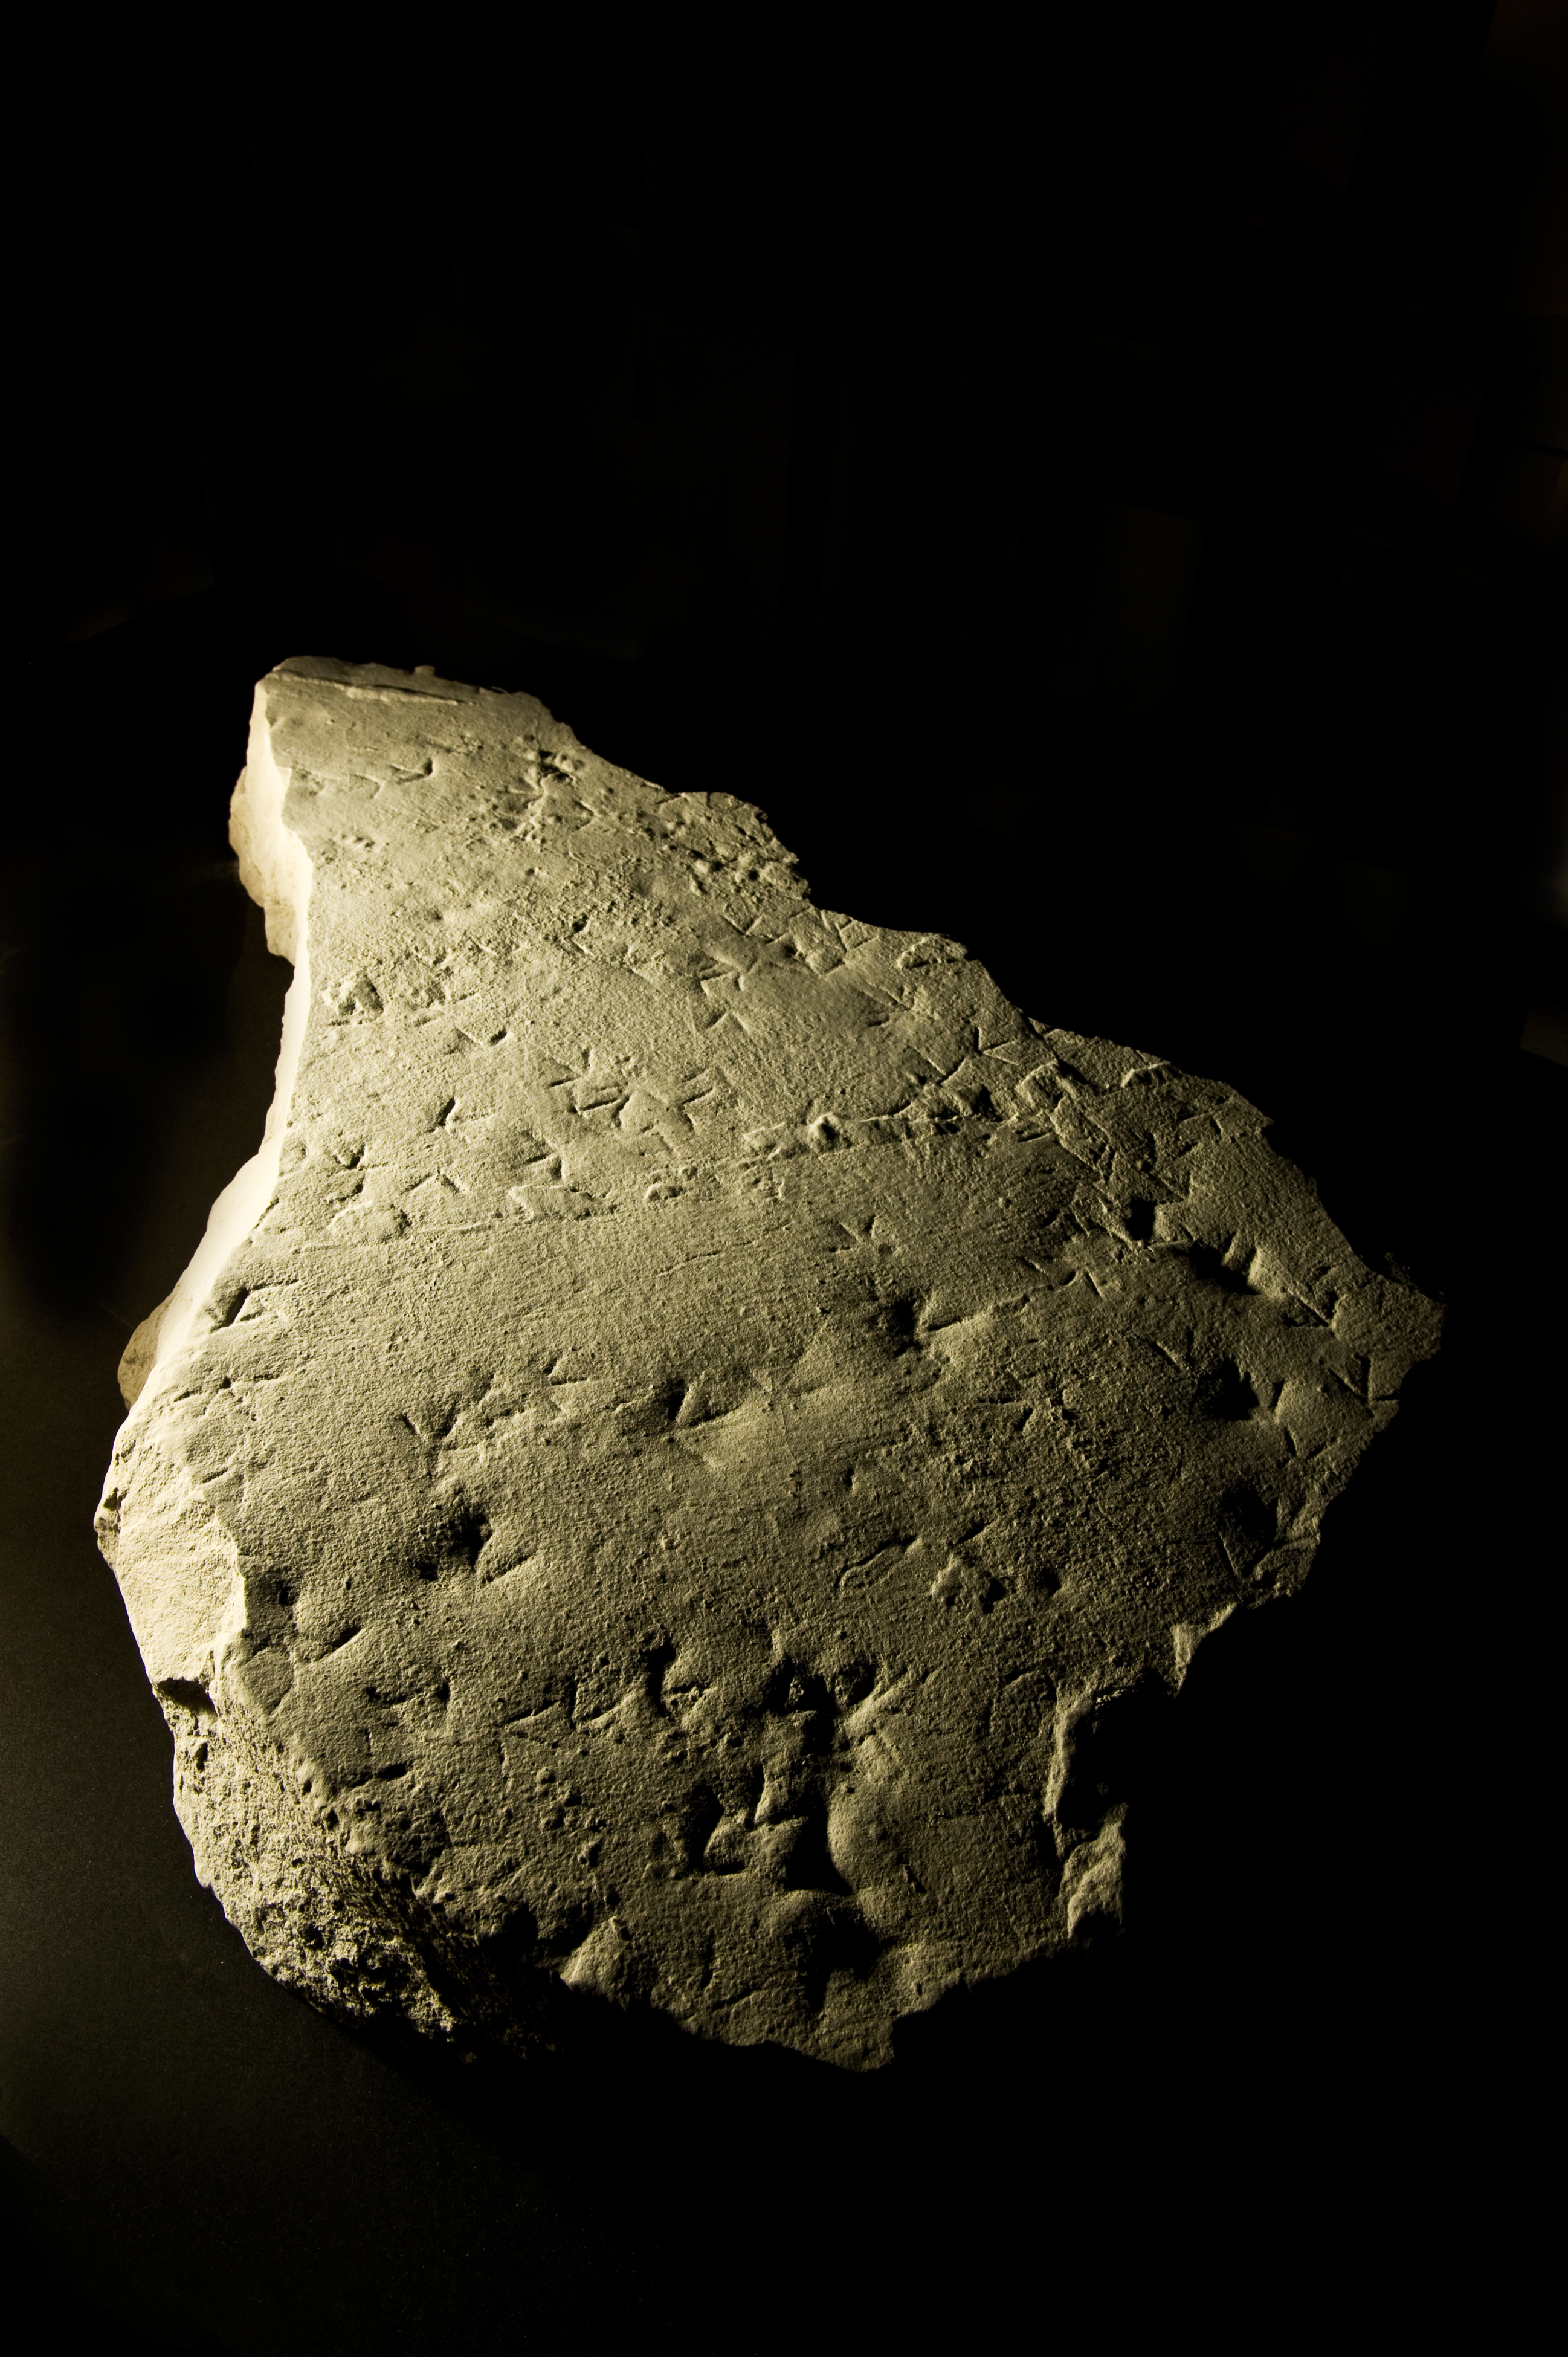 Fossilized sandpiper tracks found in the cave during construction.